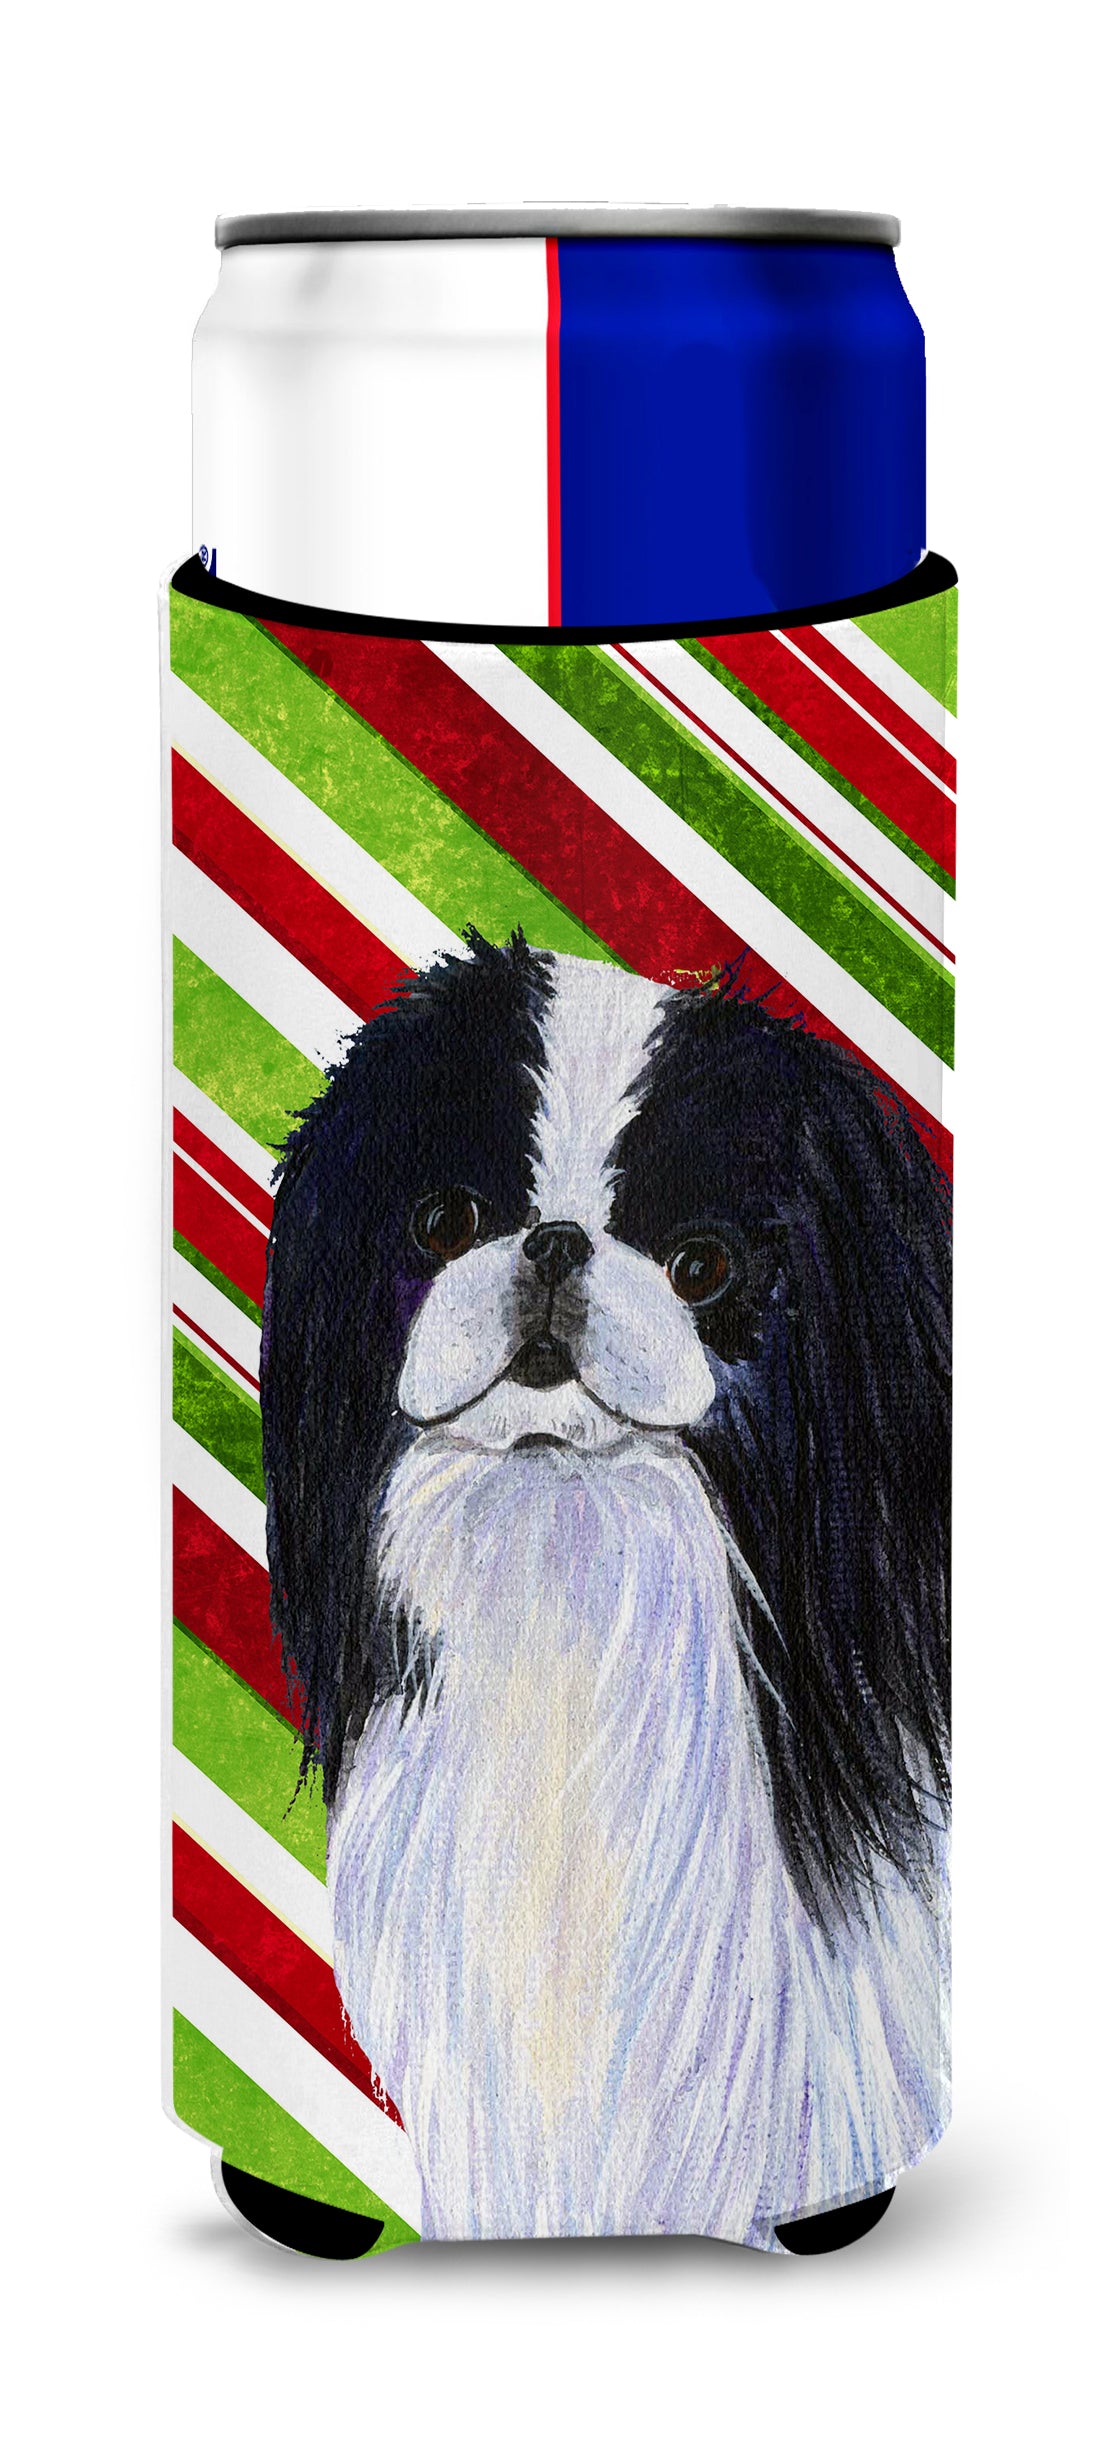 Japanese Chin Candy Cane Holiday Christmas Ultra Beverage Insulators for slim cans SS4536MUK